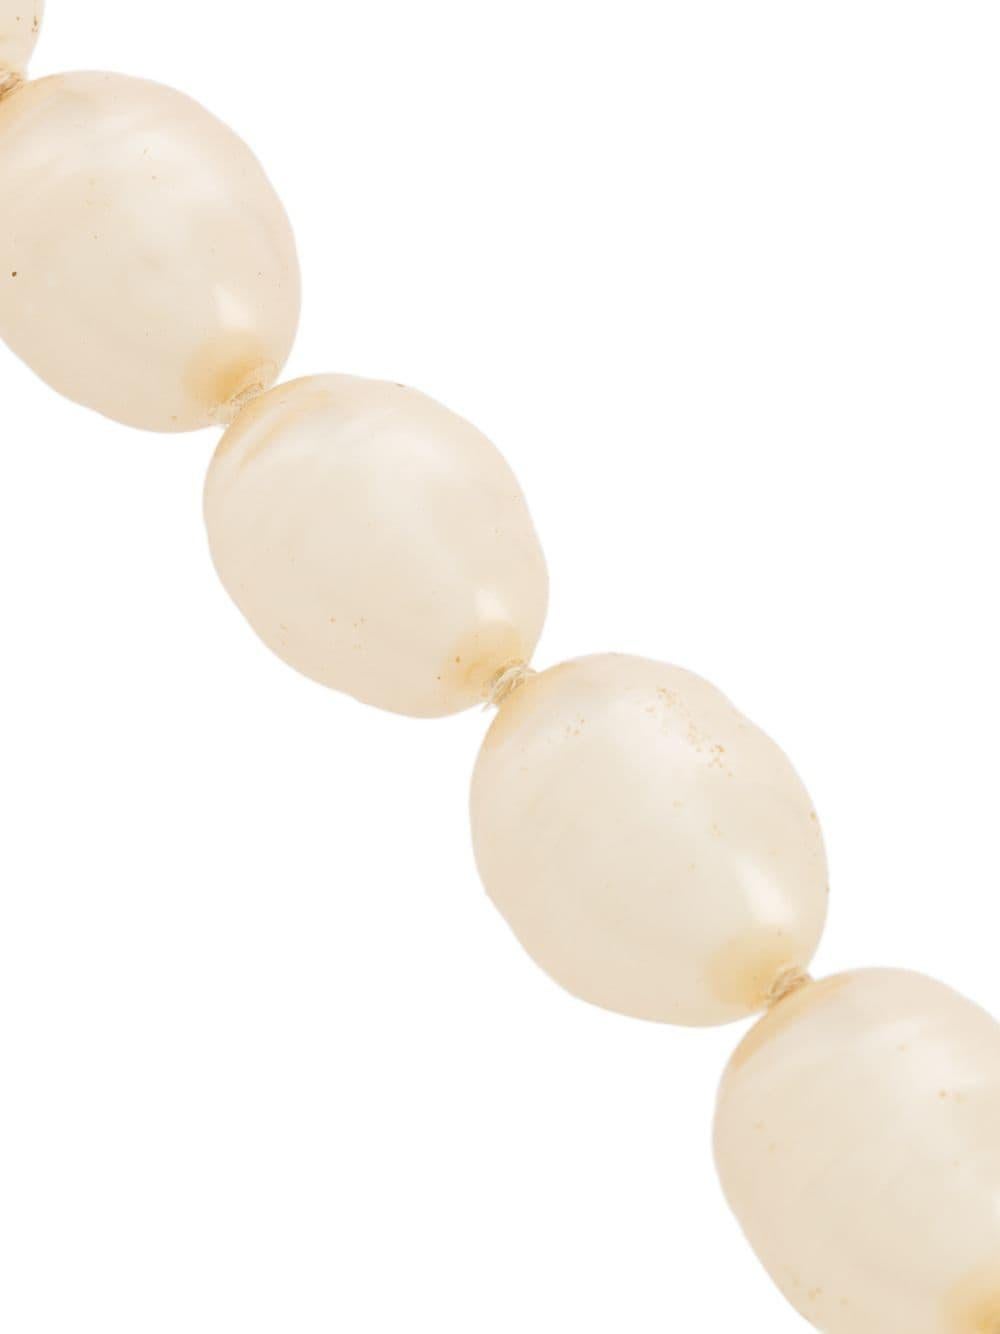 Crafted back in 1993, this timeless pearl necklace is classic and sophisticated. In a distinguished buff tone, these oval-shaped faux pearls have a medium size, which perfectly matches the short length of this lovely jewellery. The toggle fastening